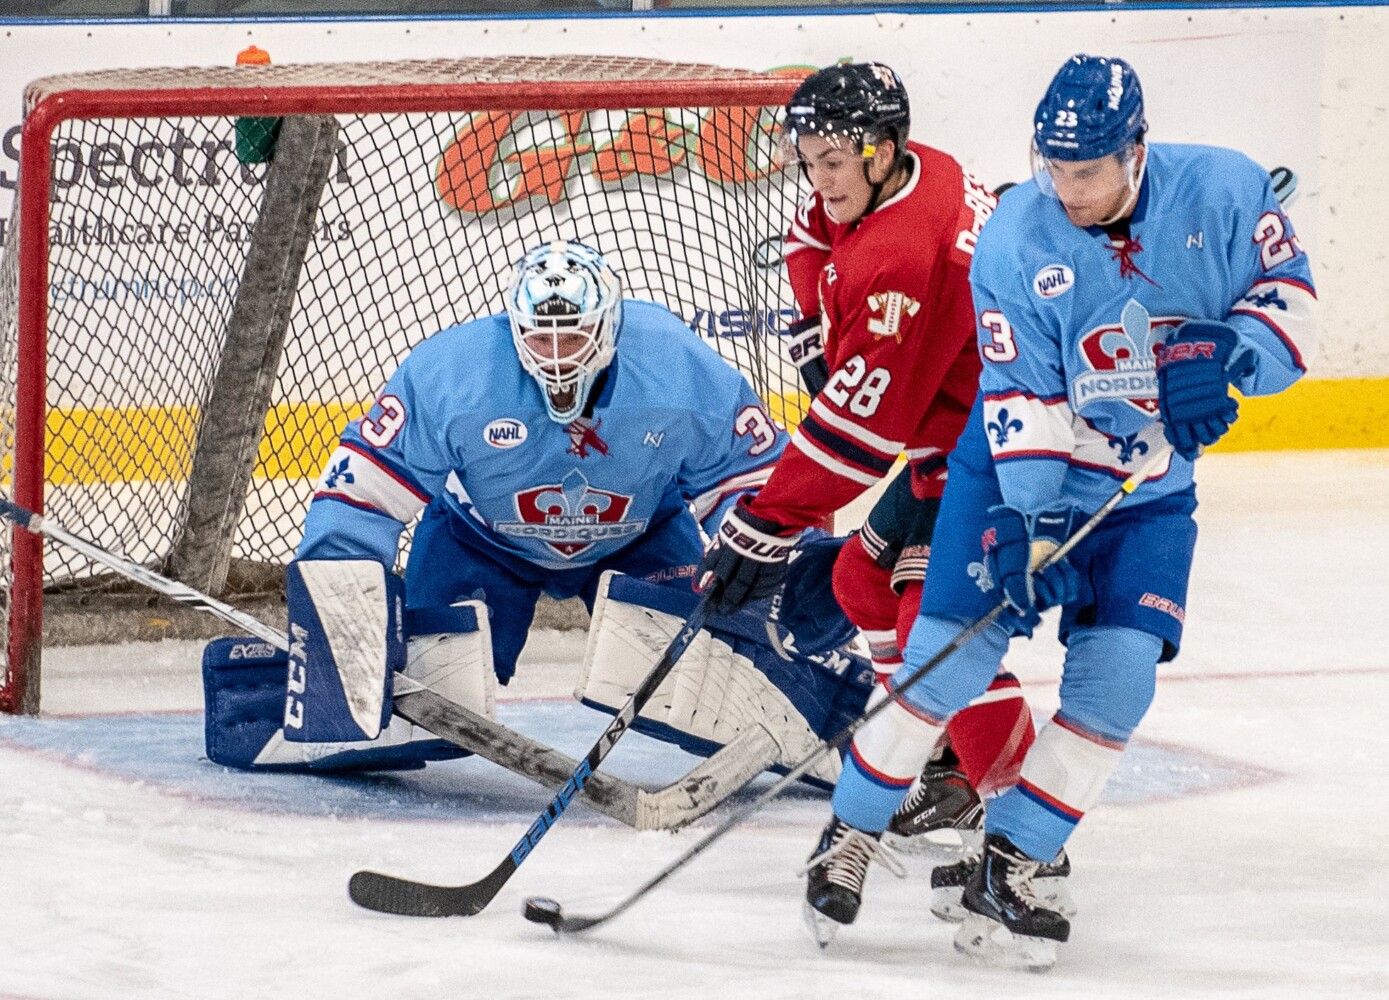 Junior hockey: Maine Nordiques advance to East Division final with